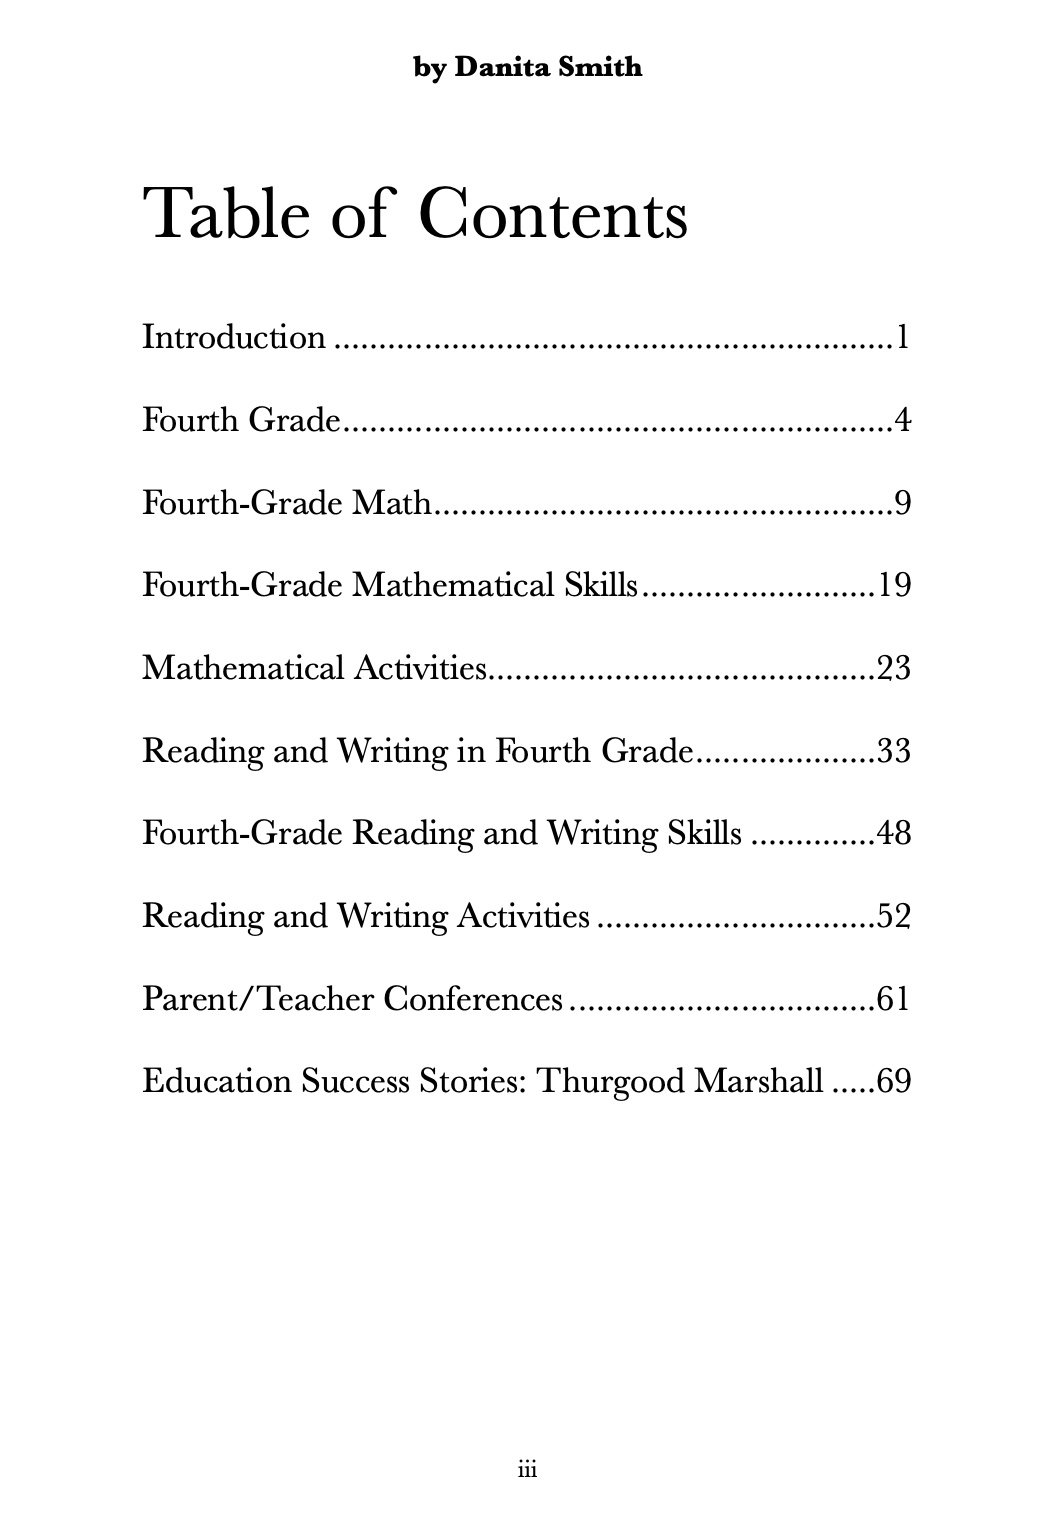 4th grade table of contents.jpg